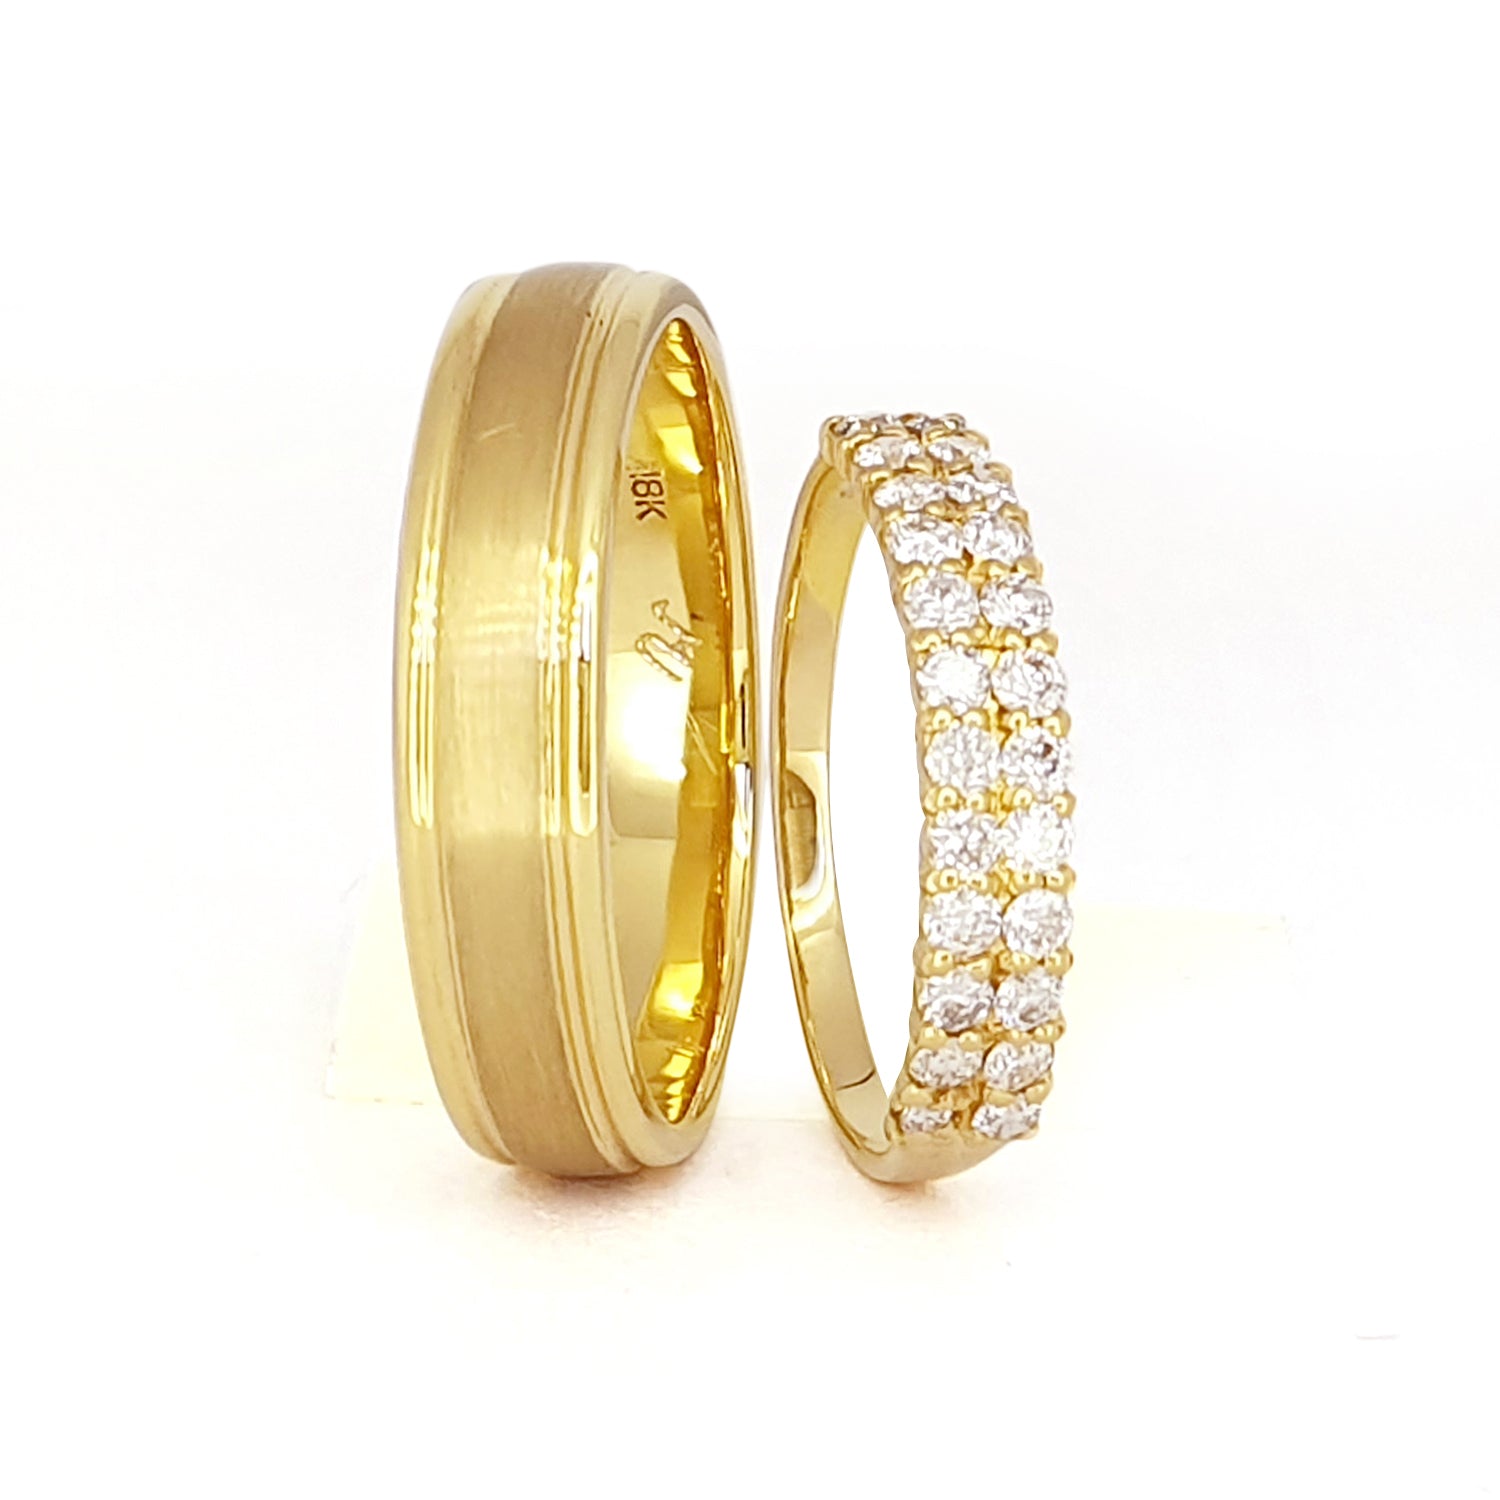 Male Wedding Bands | Groom Wedding Ring | Meicel Jewelry Store